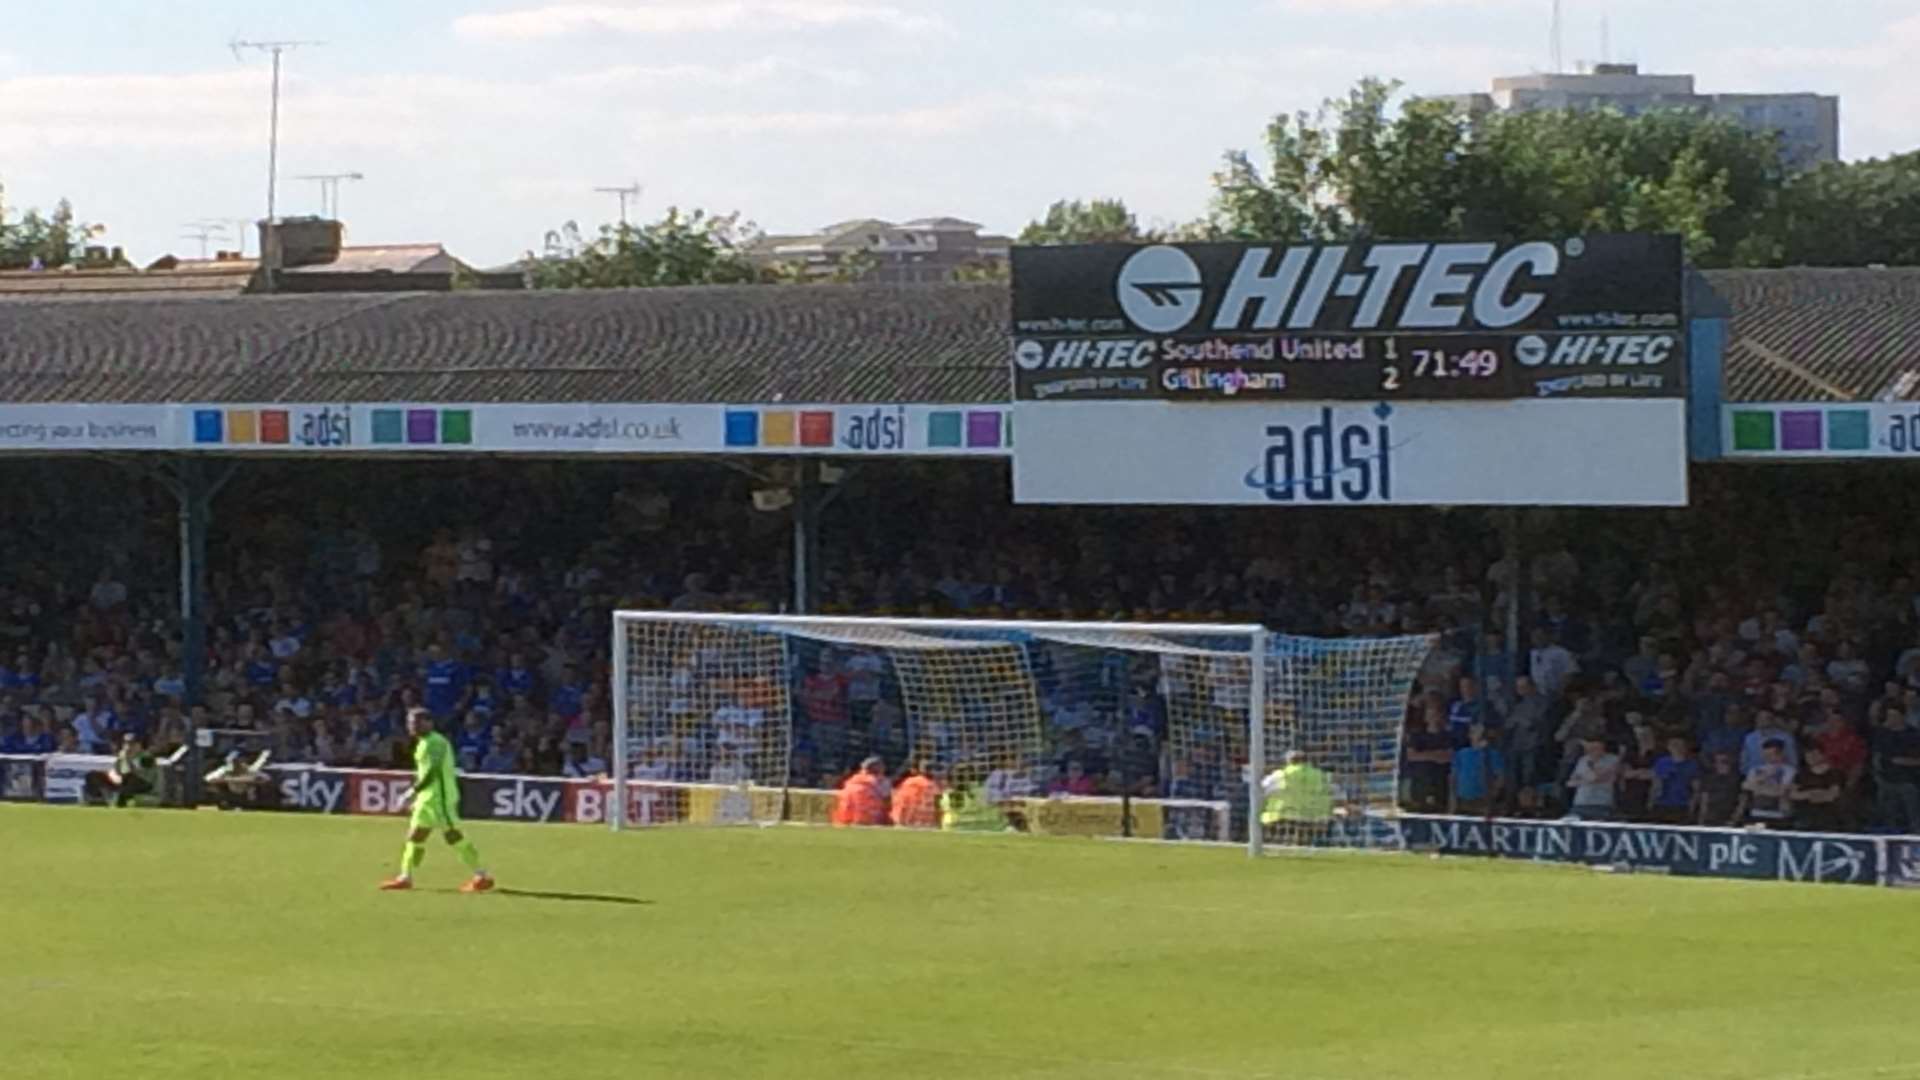 There were over 1,700 Gillingham fans at Roots Hall on Saturday